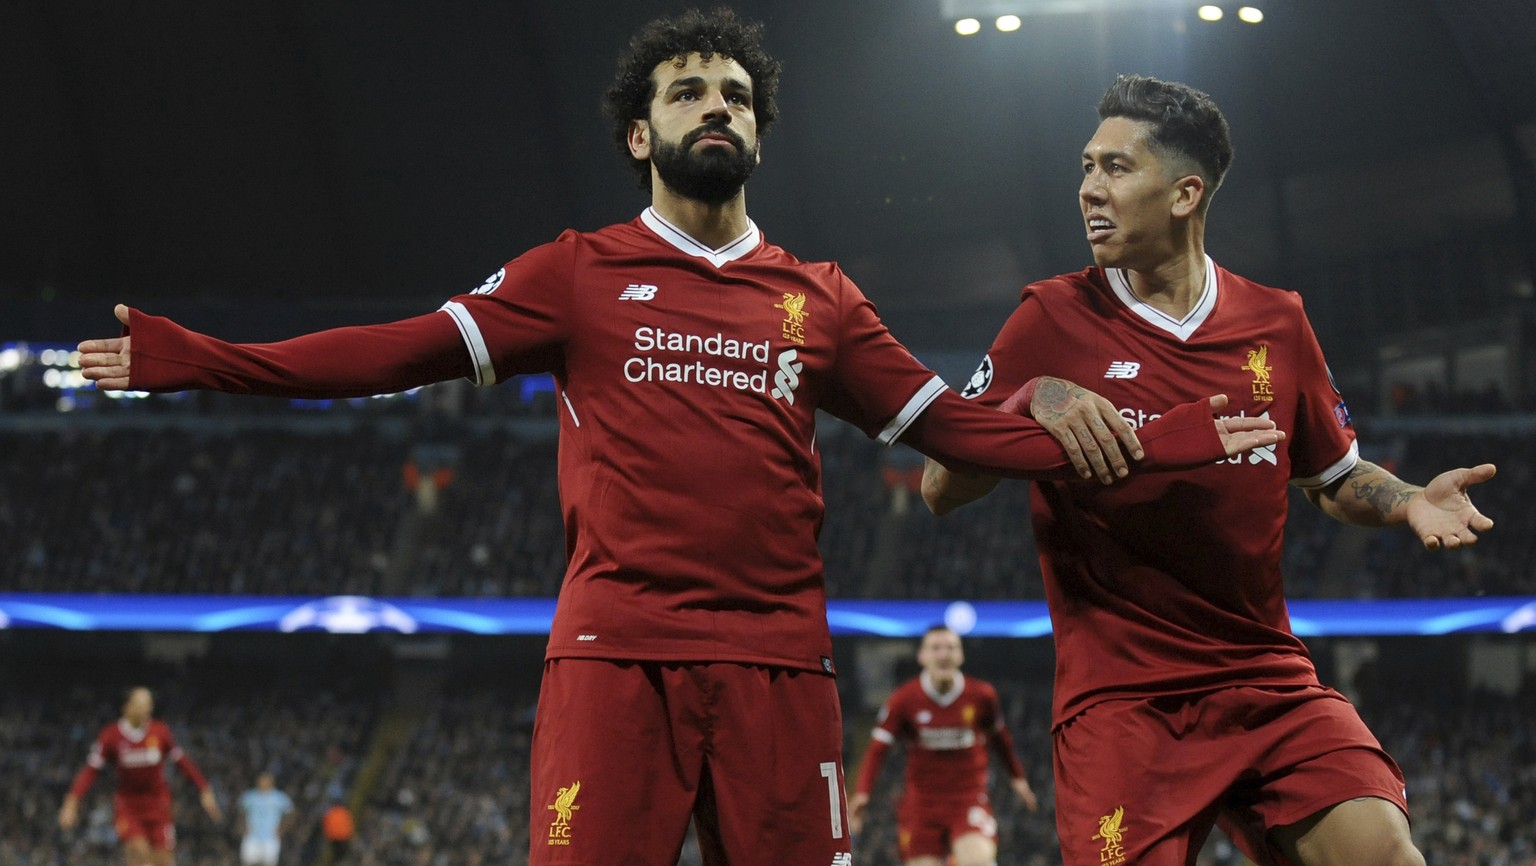 Liverpool&#039;s Mohamed Salah, left, celebrates scoring his side&#039;s first goal with Liverpool&#039;s Roberto Firmino during the Champions League quarterfinal second leg soccer match between Manch ...